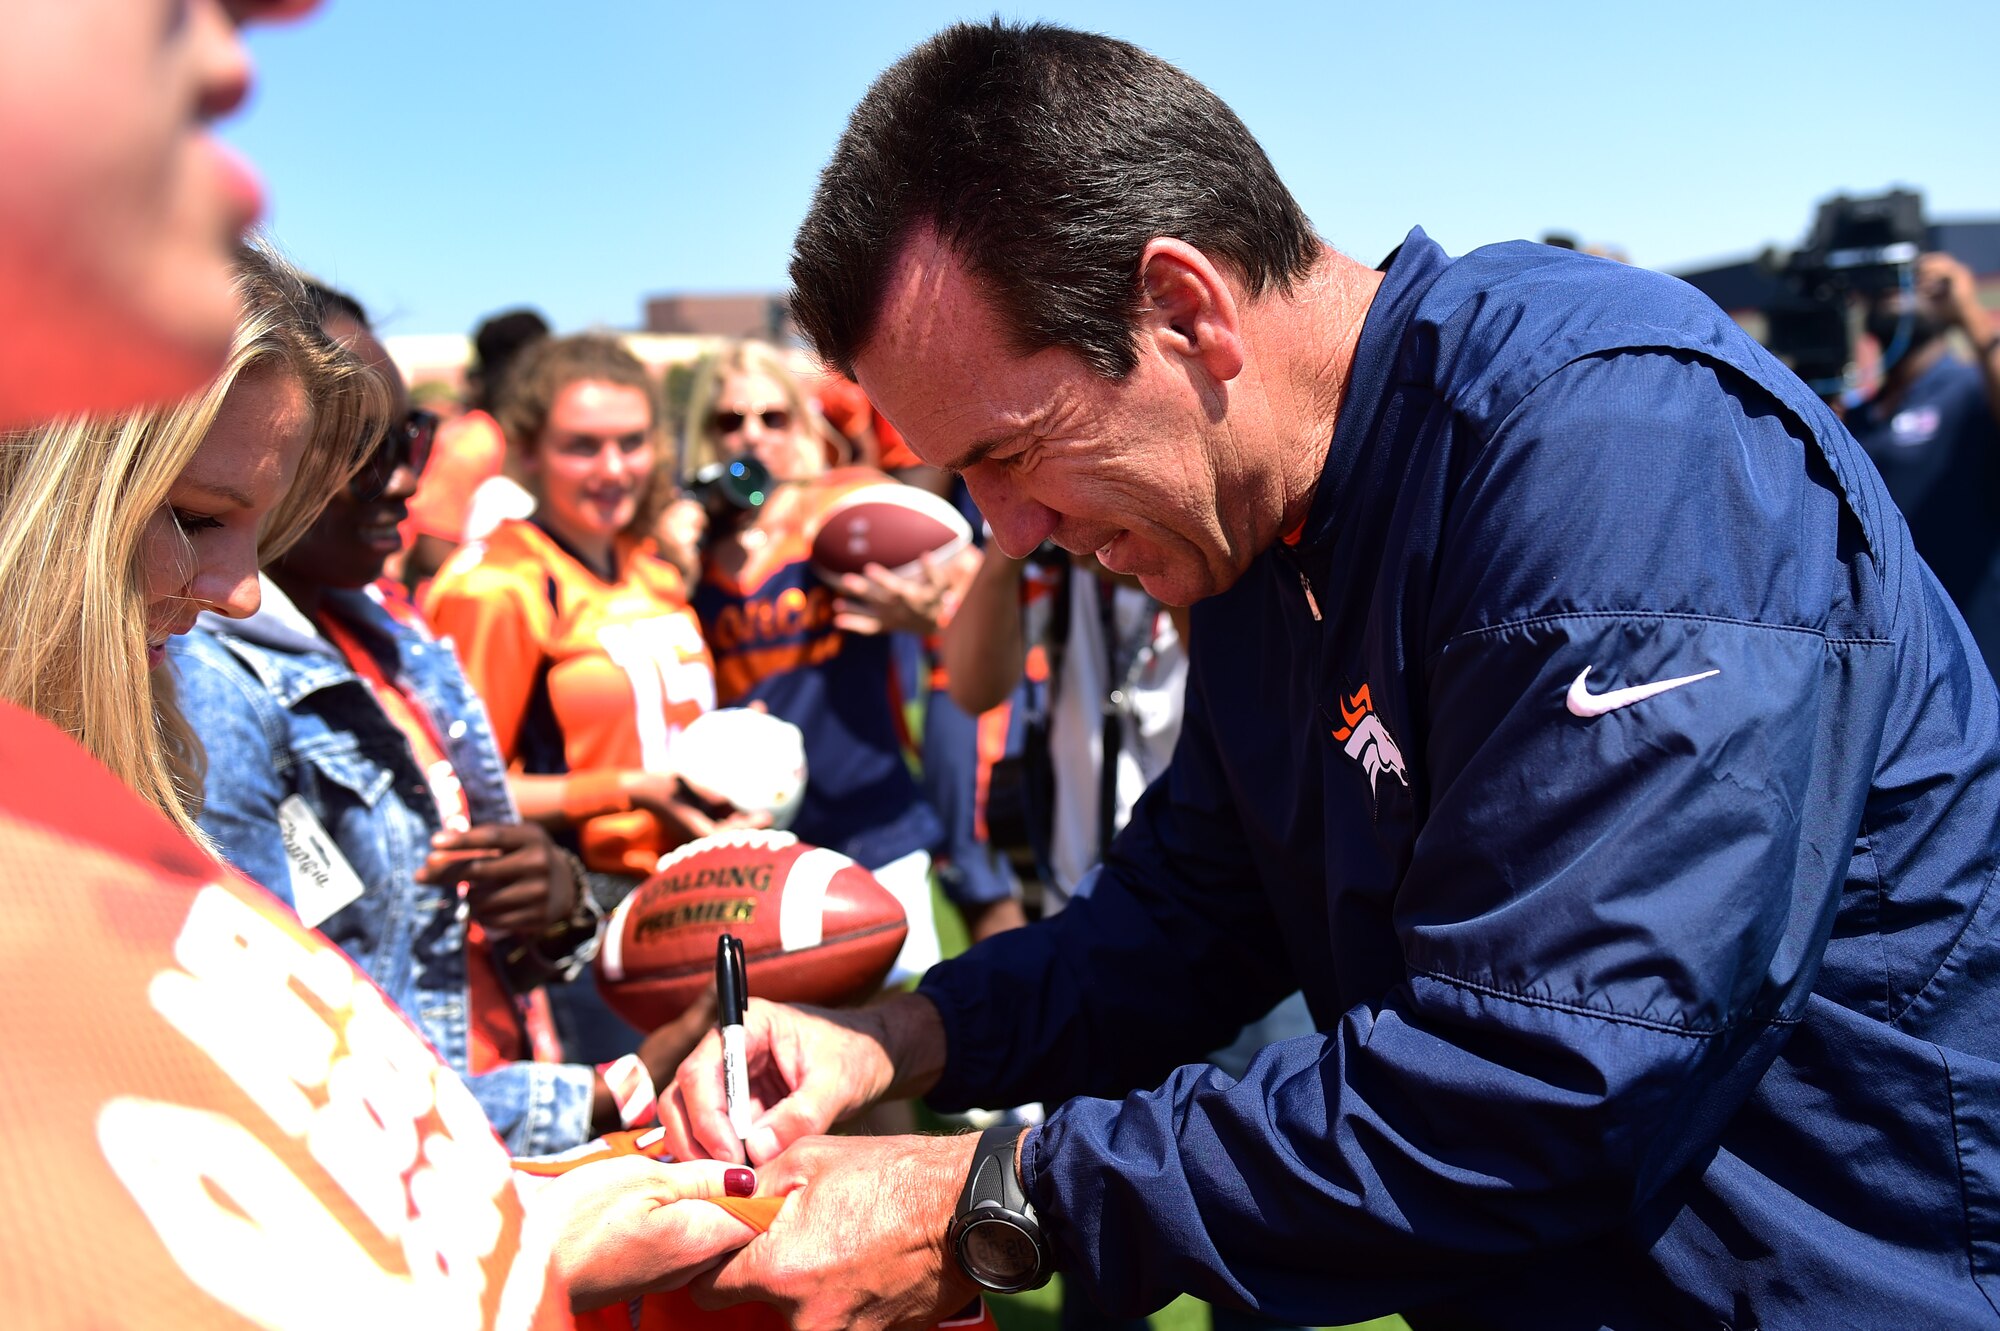 Gary Kubiak, Denver Broncos’ head coach, signs autographs during a military training camp at the Denver Broncos’ University of Colorado Health Training Center Fieldhouse in Englewood, Colo., August 25, 2016. The camp invited ten, five member teams to compete against each other and be a part of the NFL boot camp experience. (U.S. Air Force photo by Airman 1st Class Gabrielle Spradling/Released)